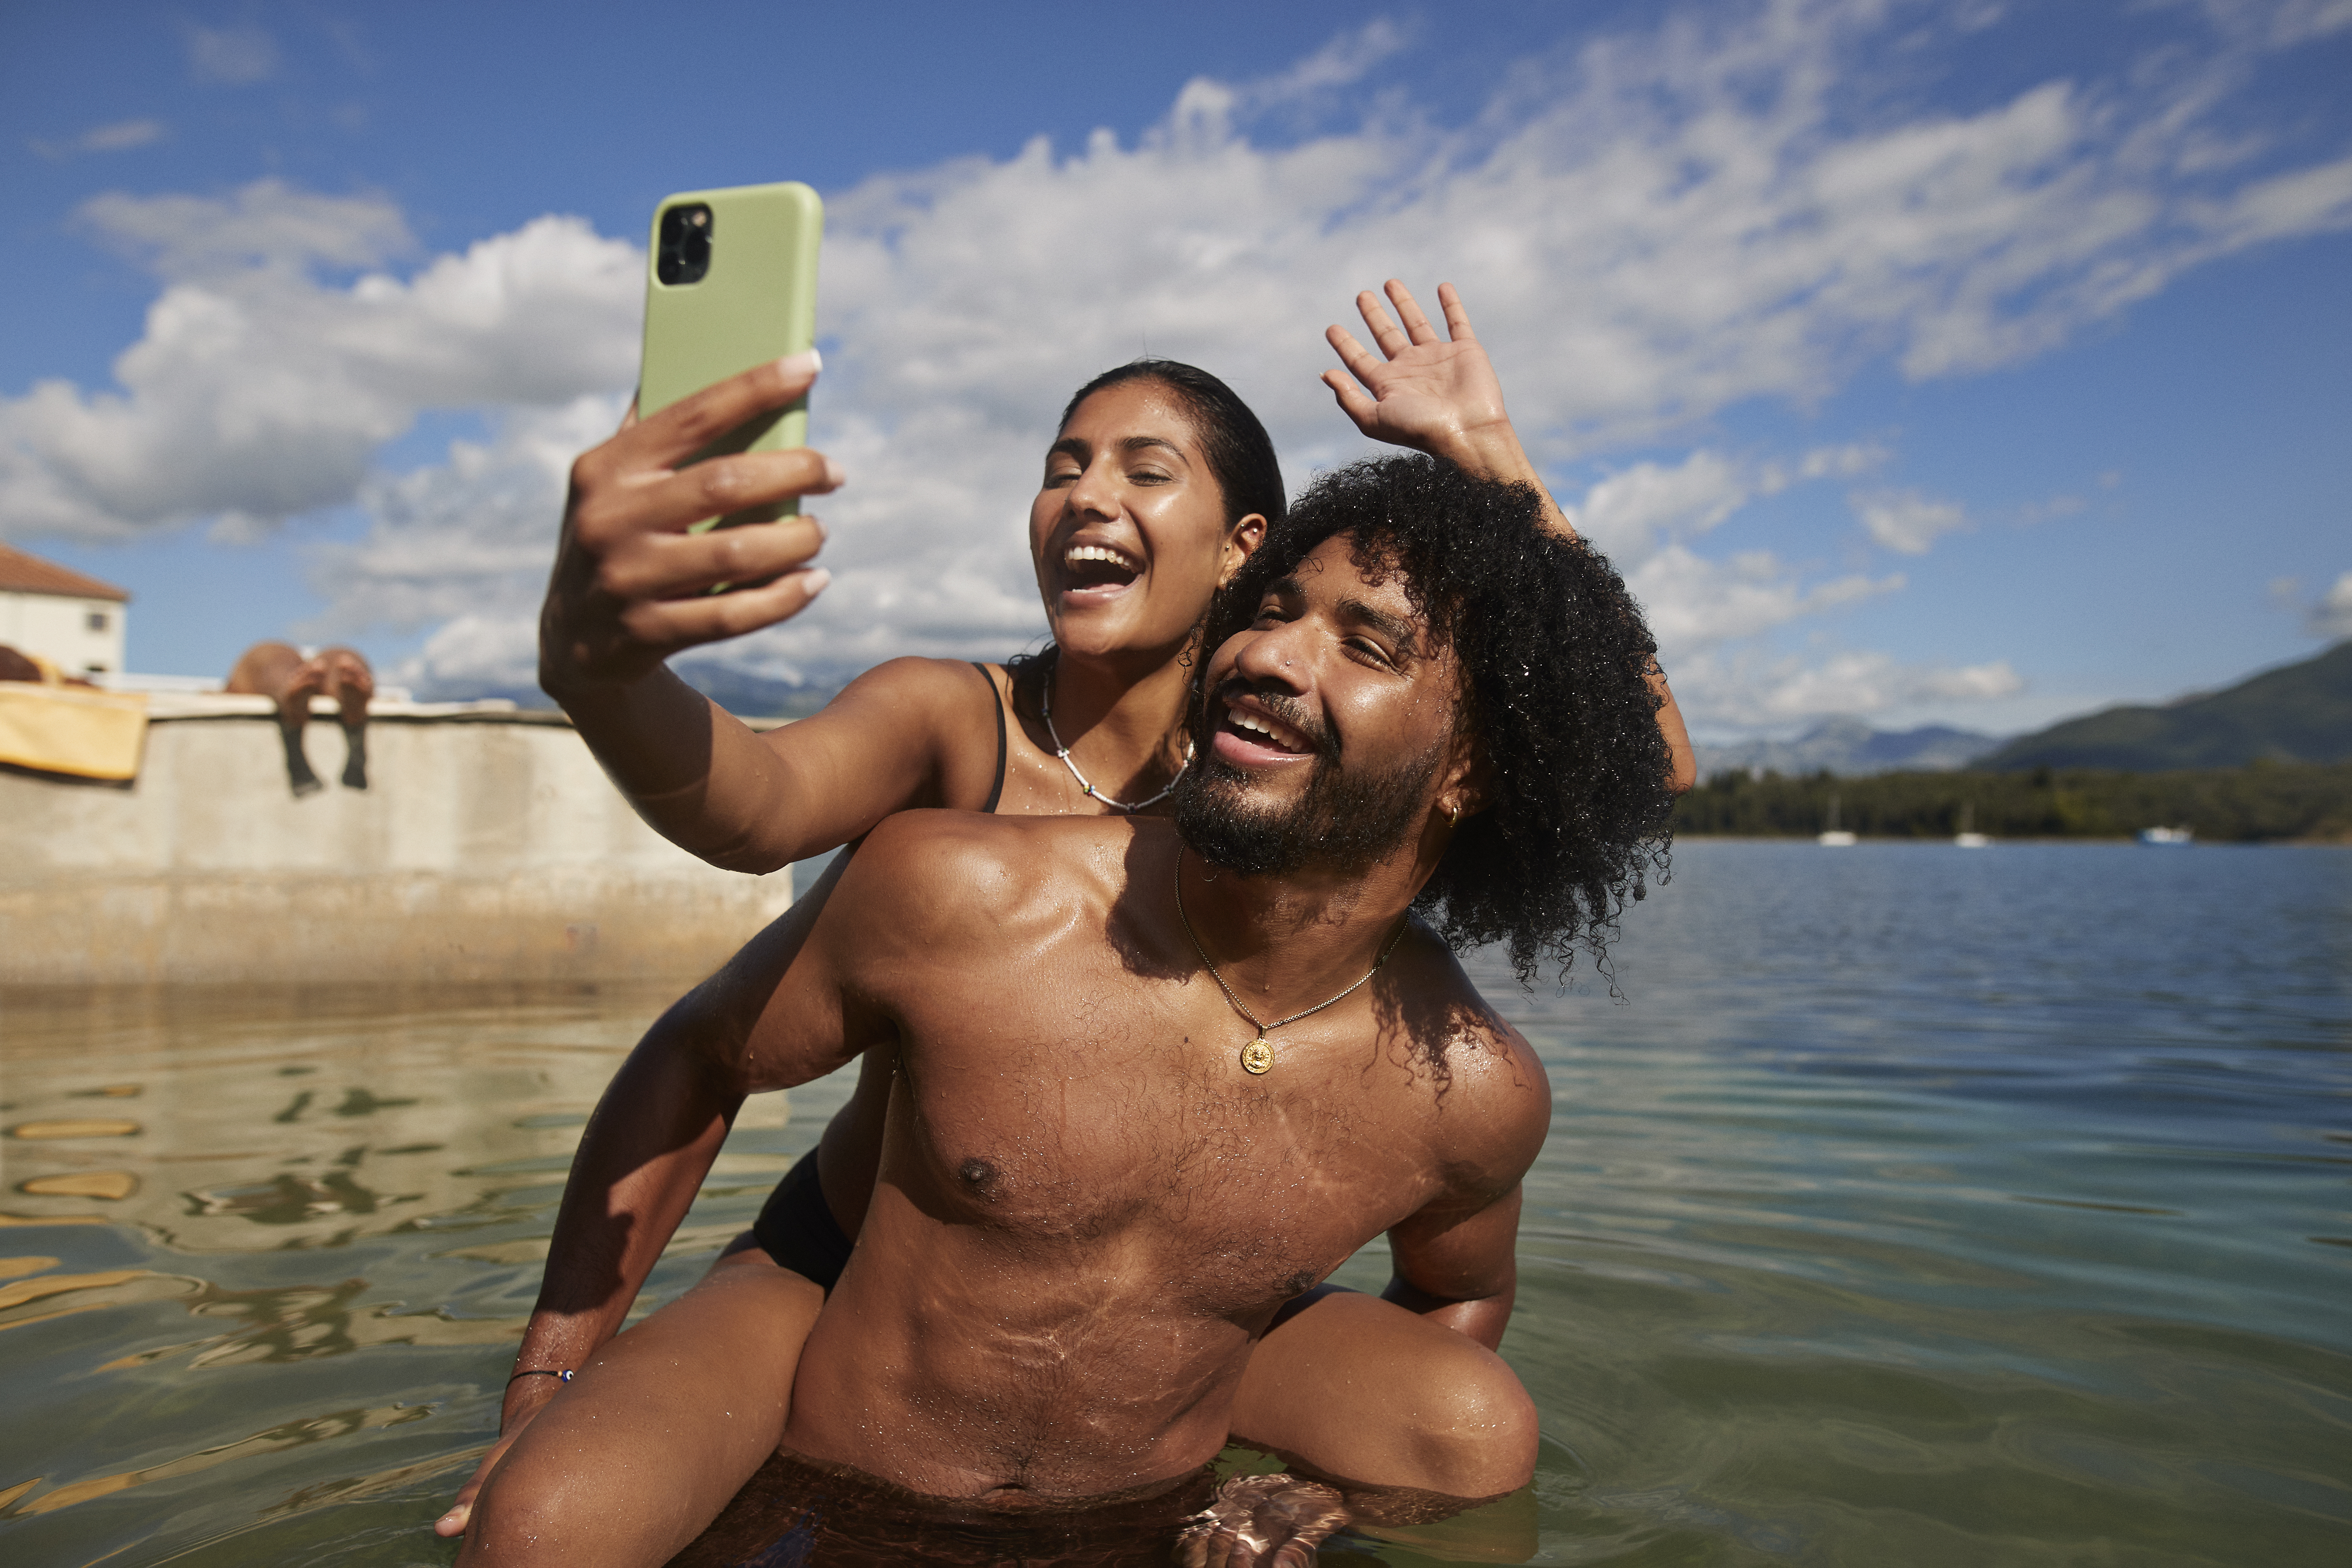 A happy woman taking selfie while her boyfriend gives her piggybackride at a bay. | Source: Getty Images